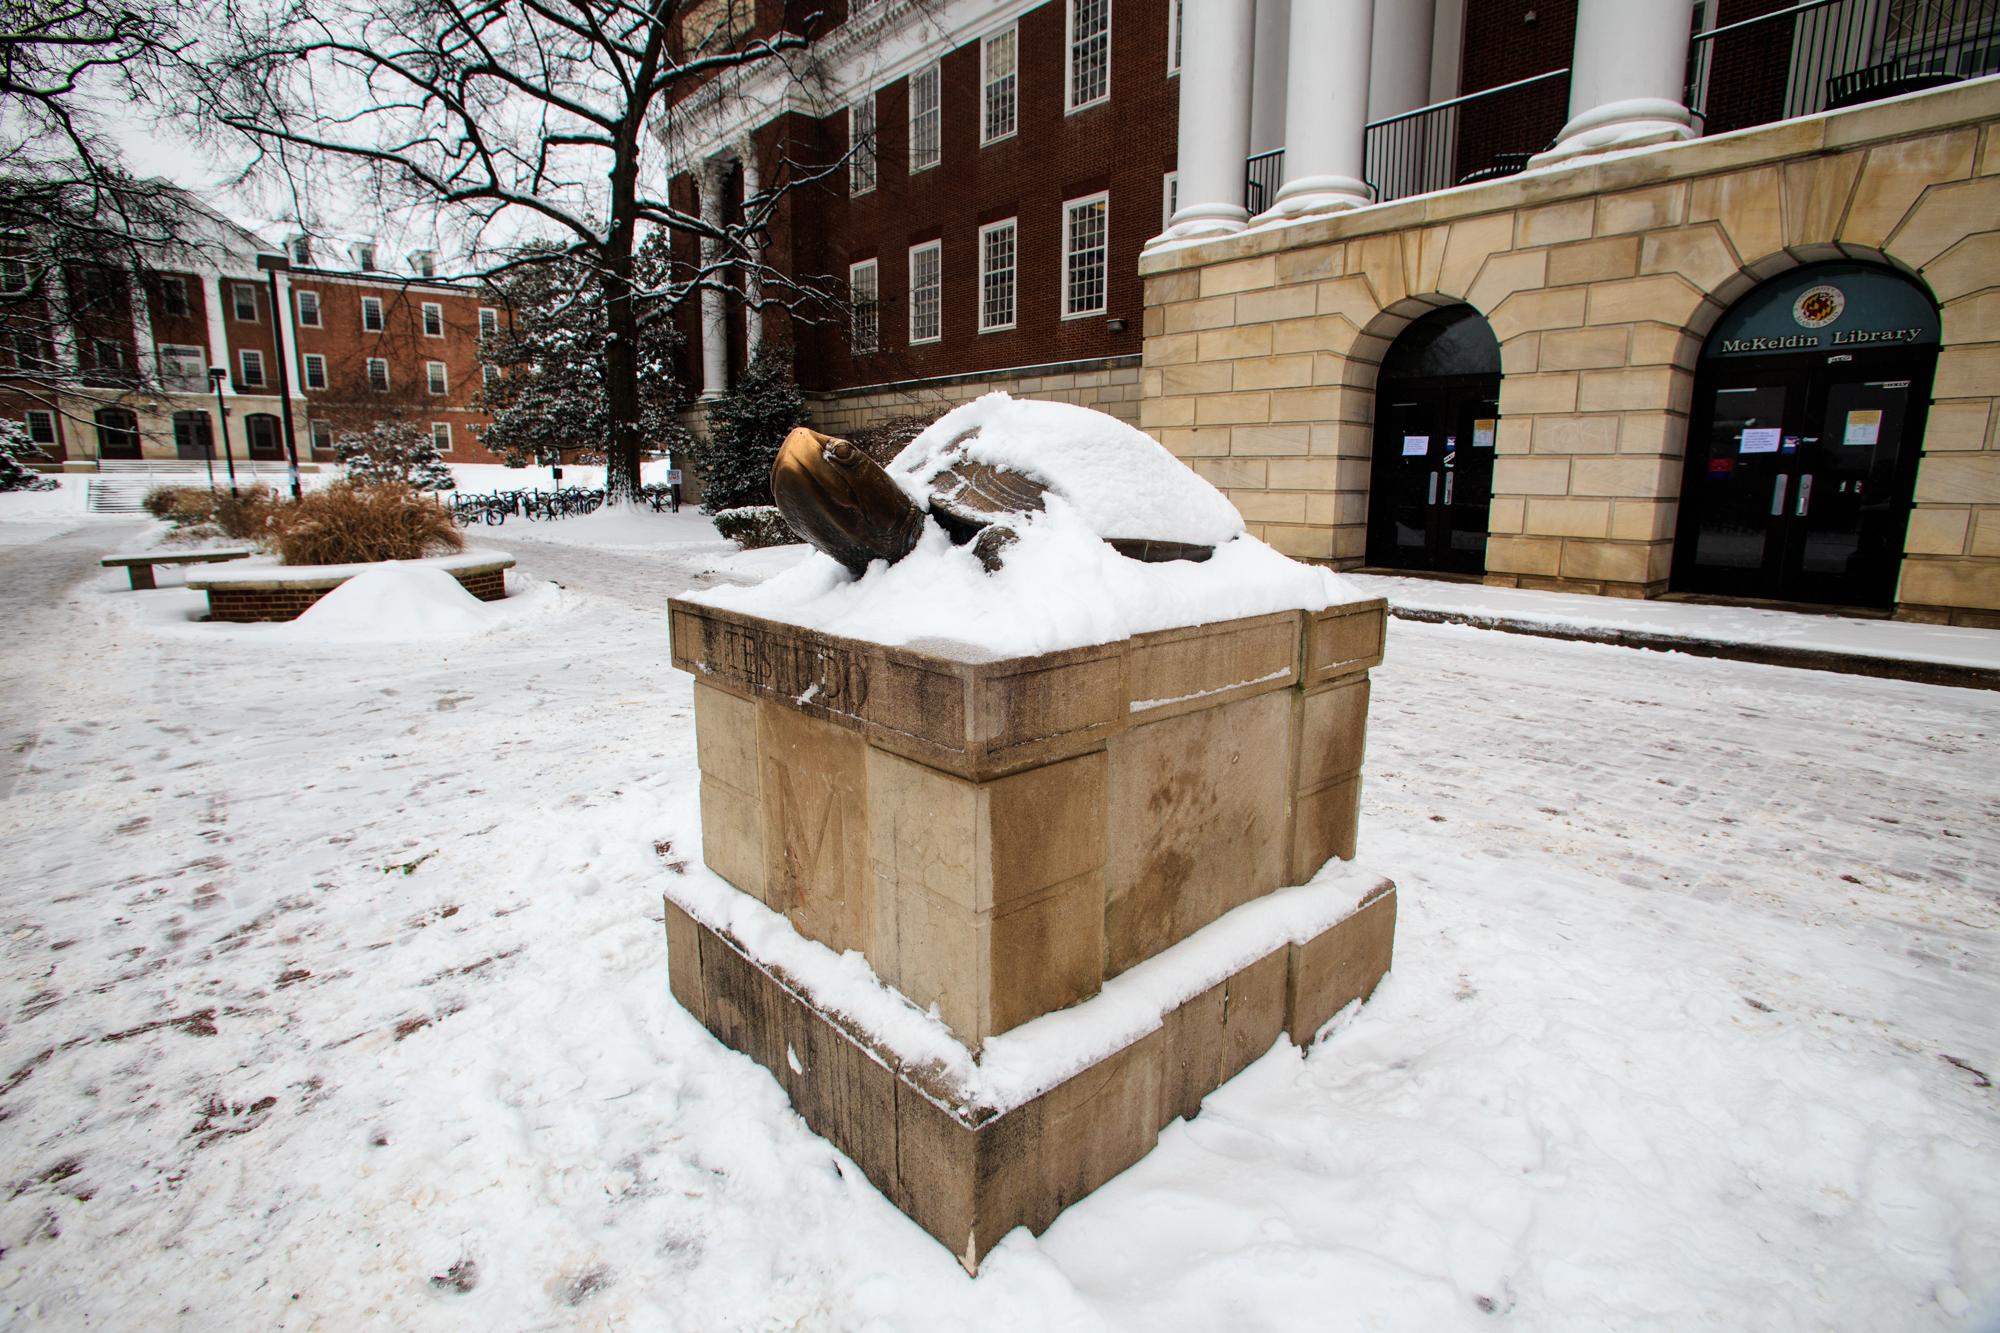 Testudo covered in snow